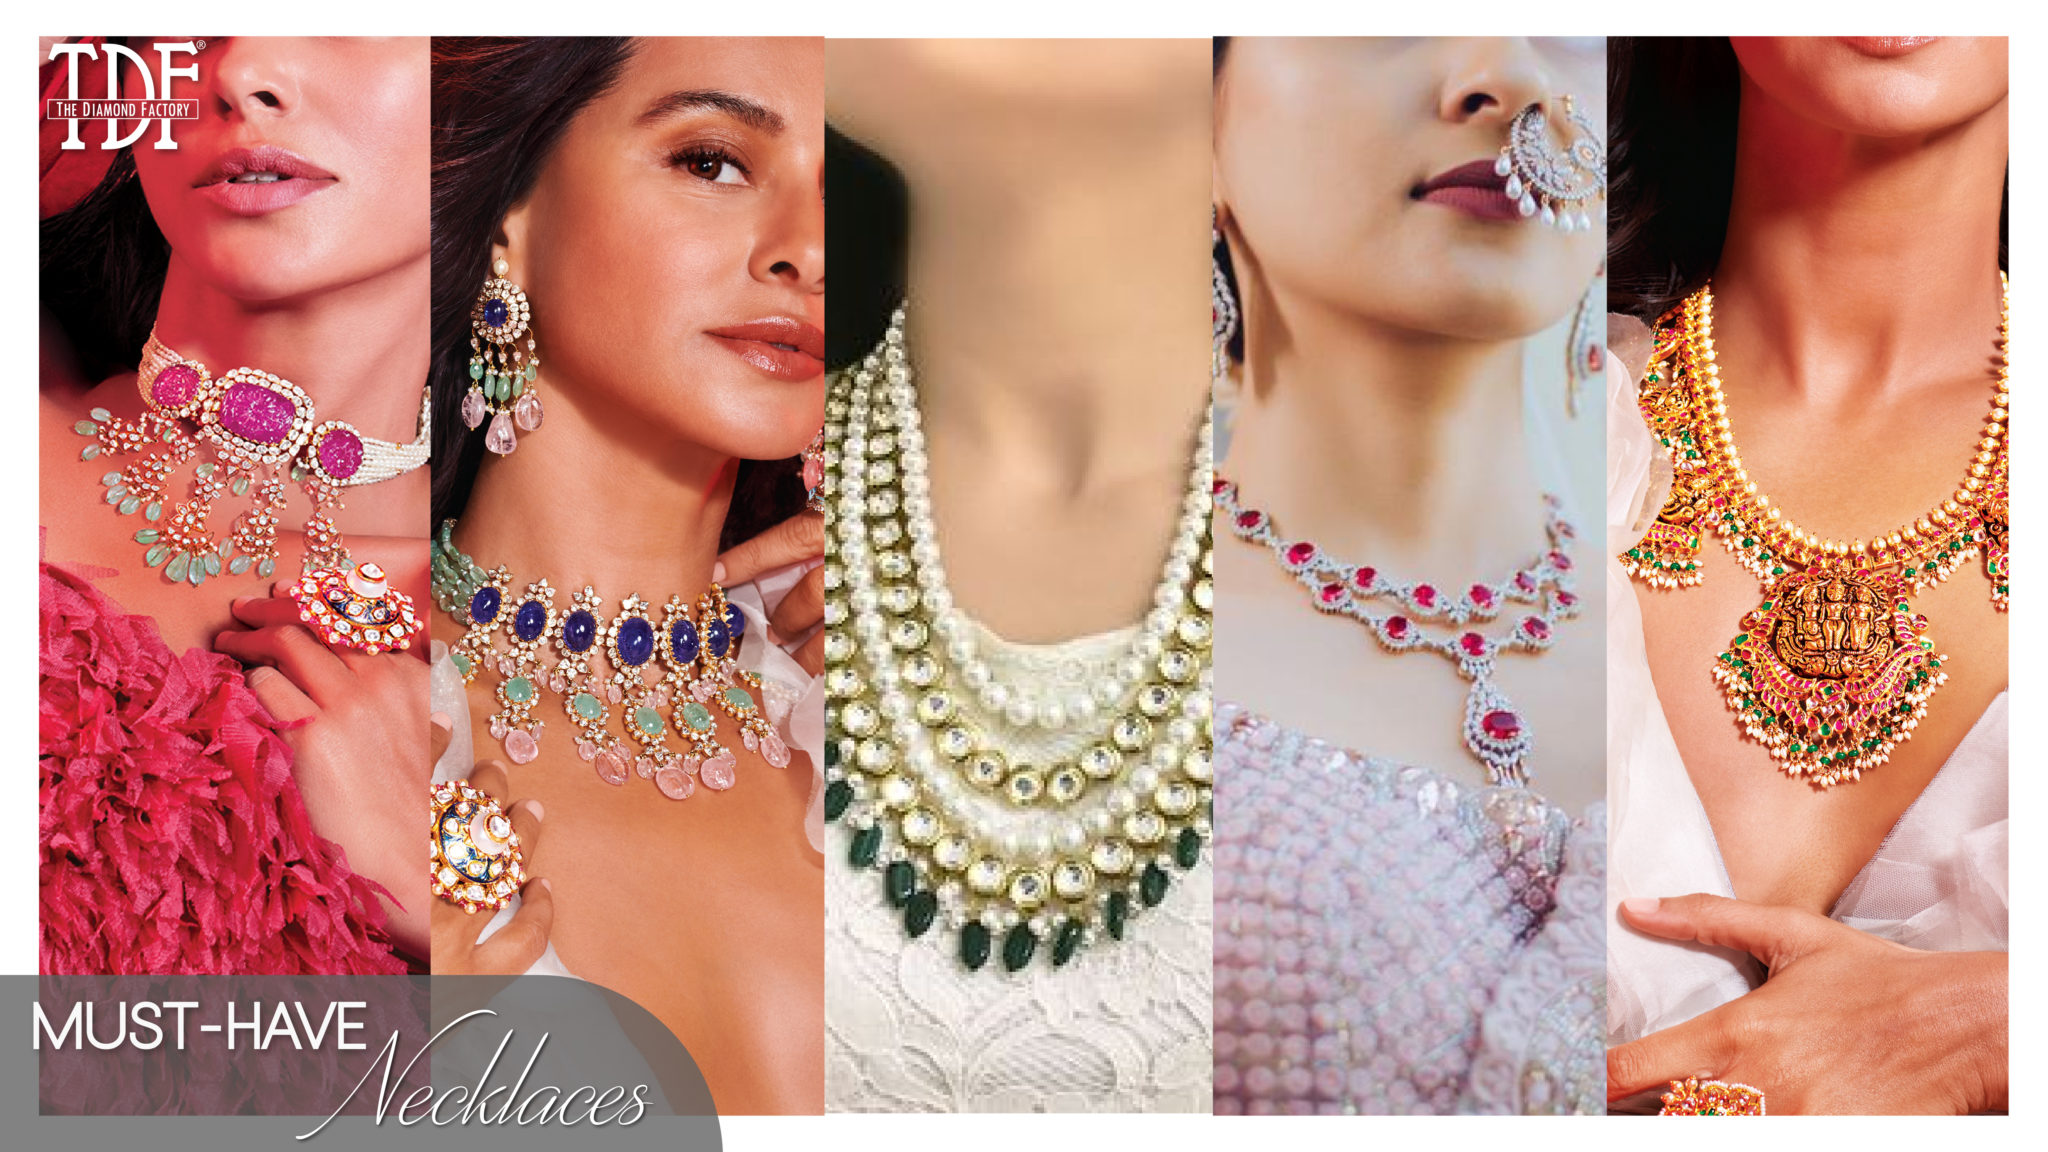 Must-Have Stunning Necklaces For Brides and Bridesmaids This Season